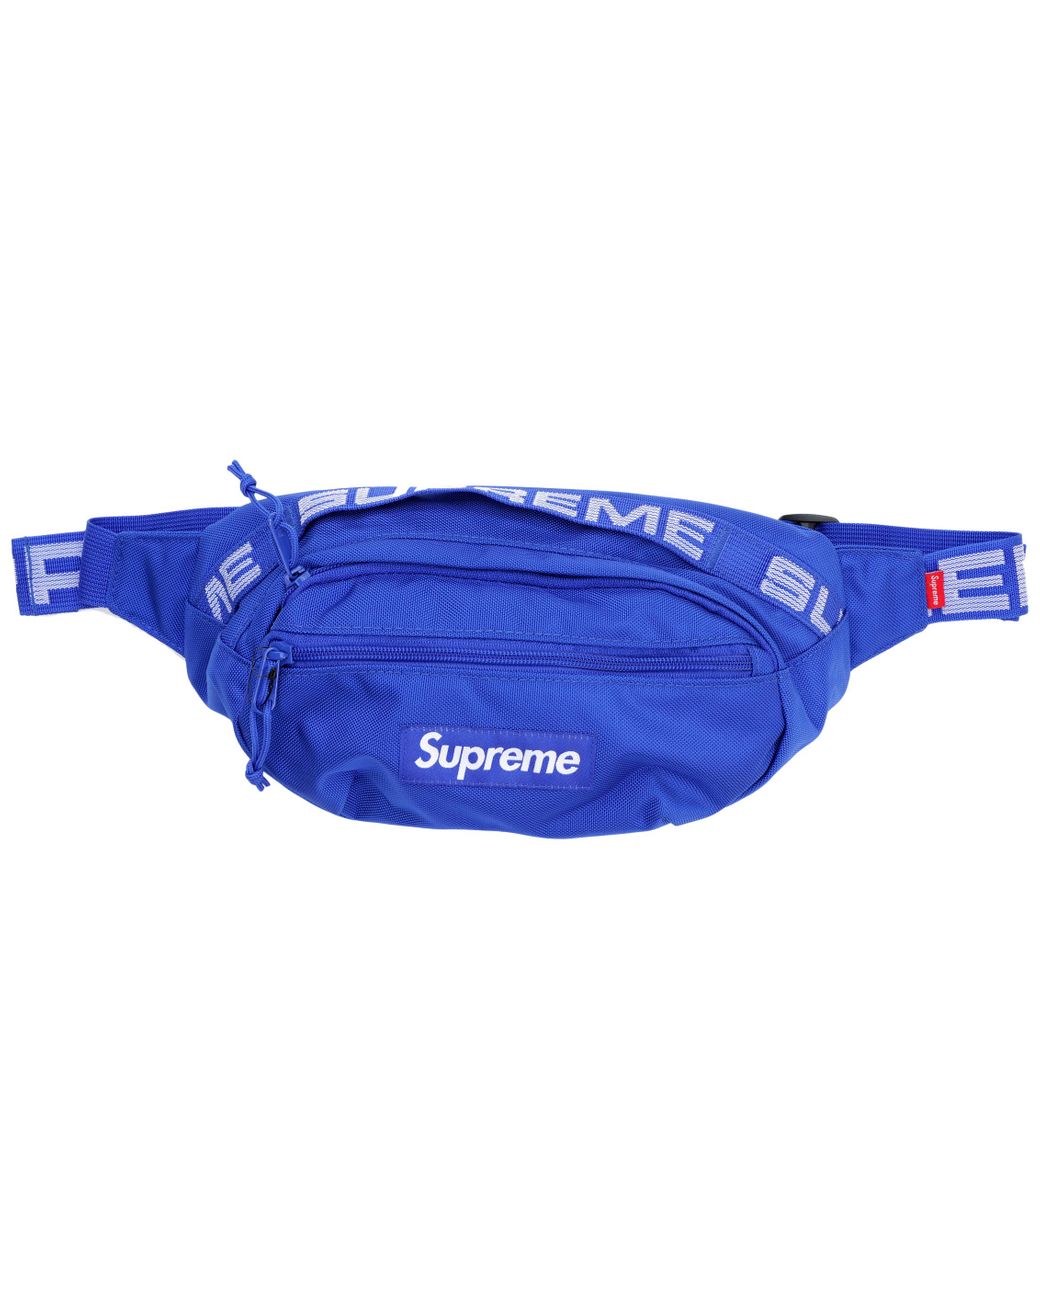 Supreme Waist Bag Ss18 In Blue Lyst - fanny pack roblox supreme